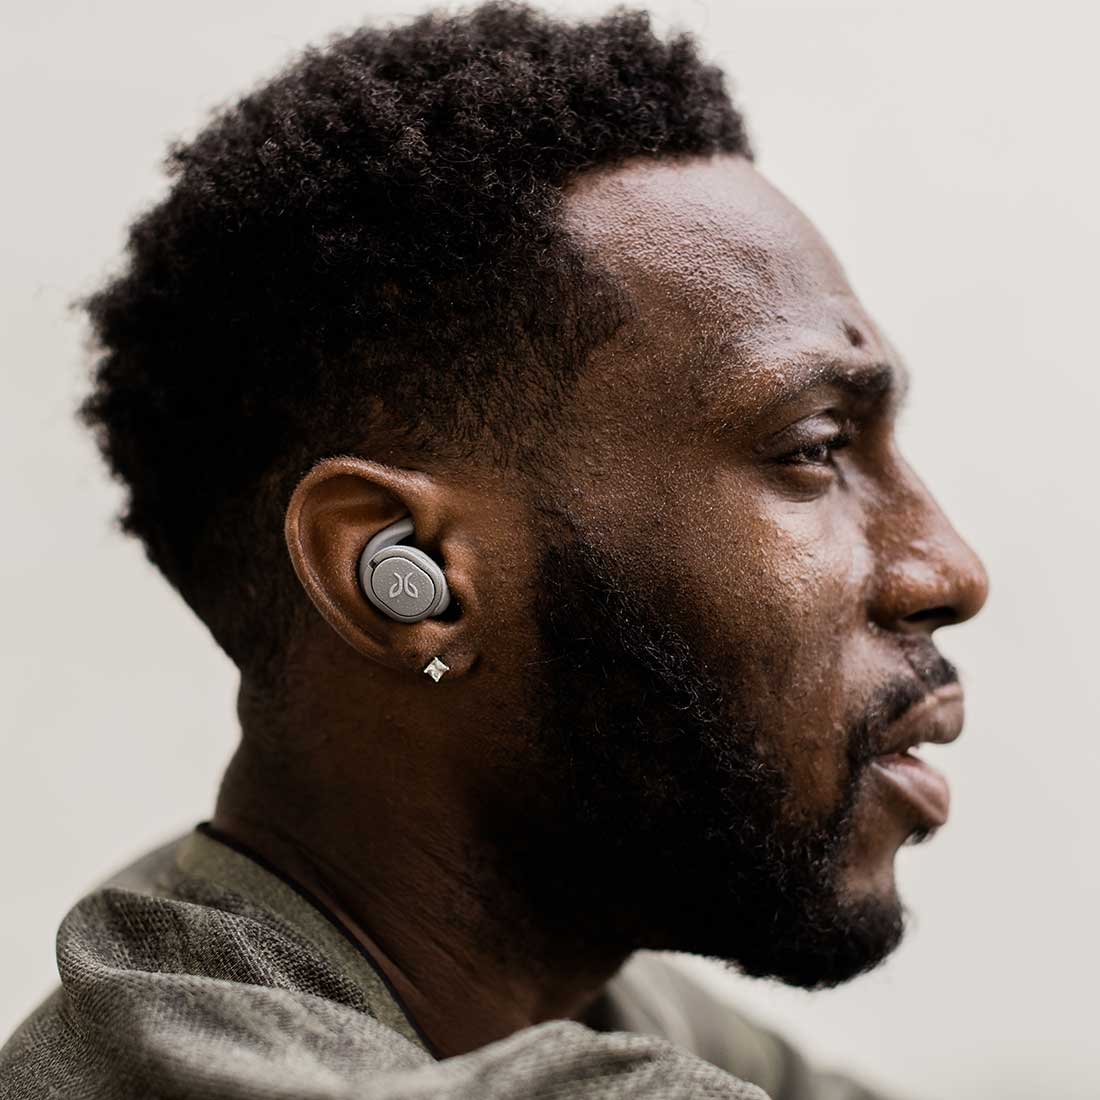 Jaybird lifestyle image. The profile of a man wearing the earbuds in storm-gray.